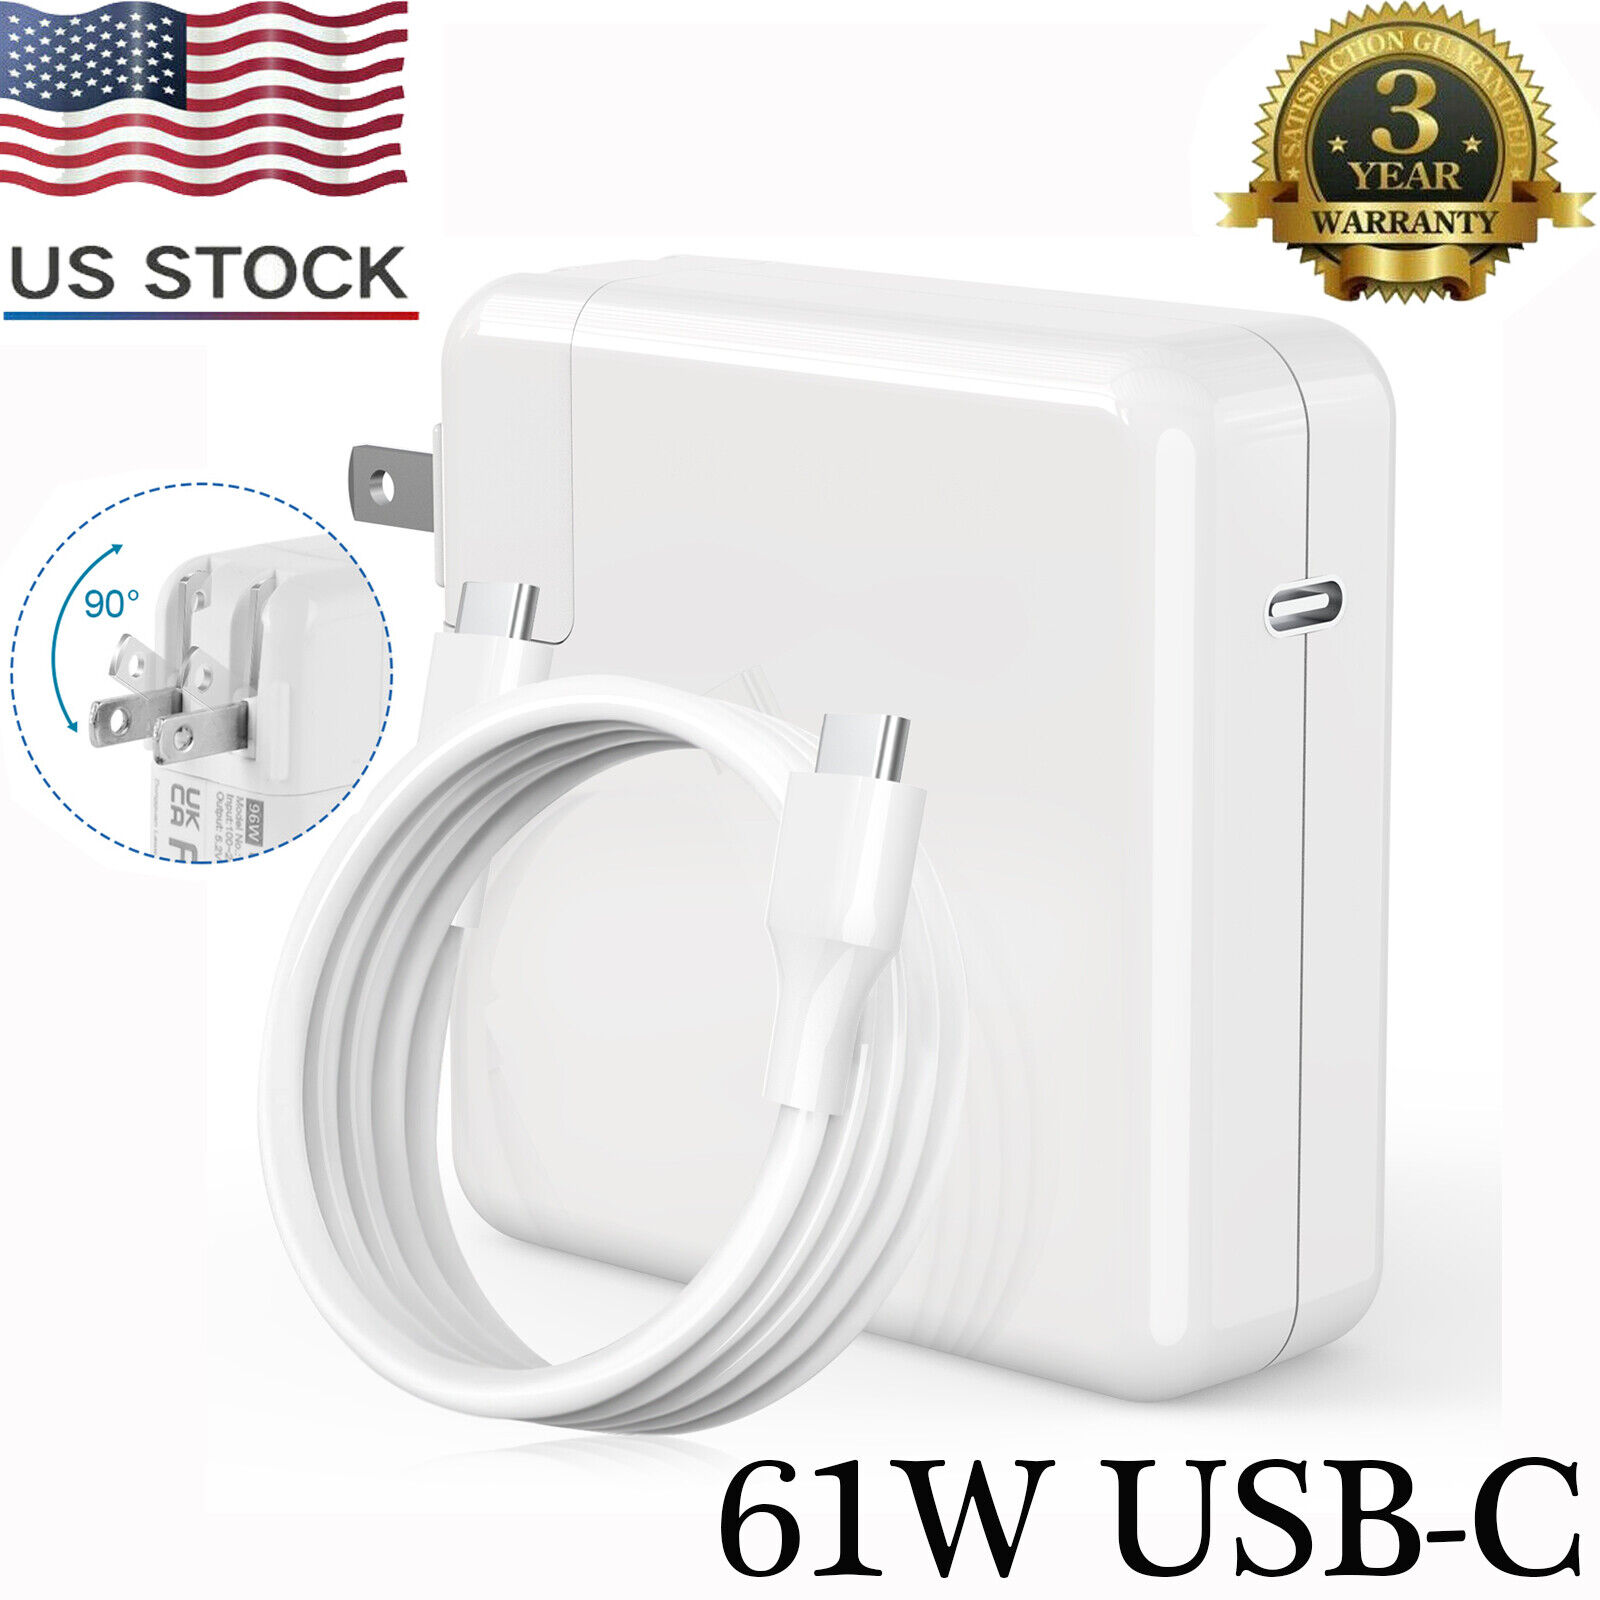 New 61W USB-C Power Charger For MacBook Pro 14 13 12'' 2016 Mac Book Air 2018 US